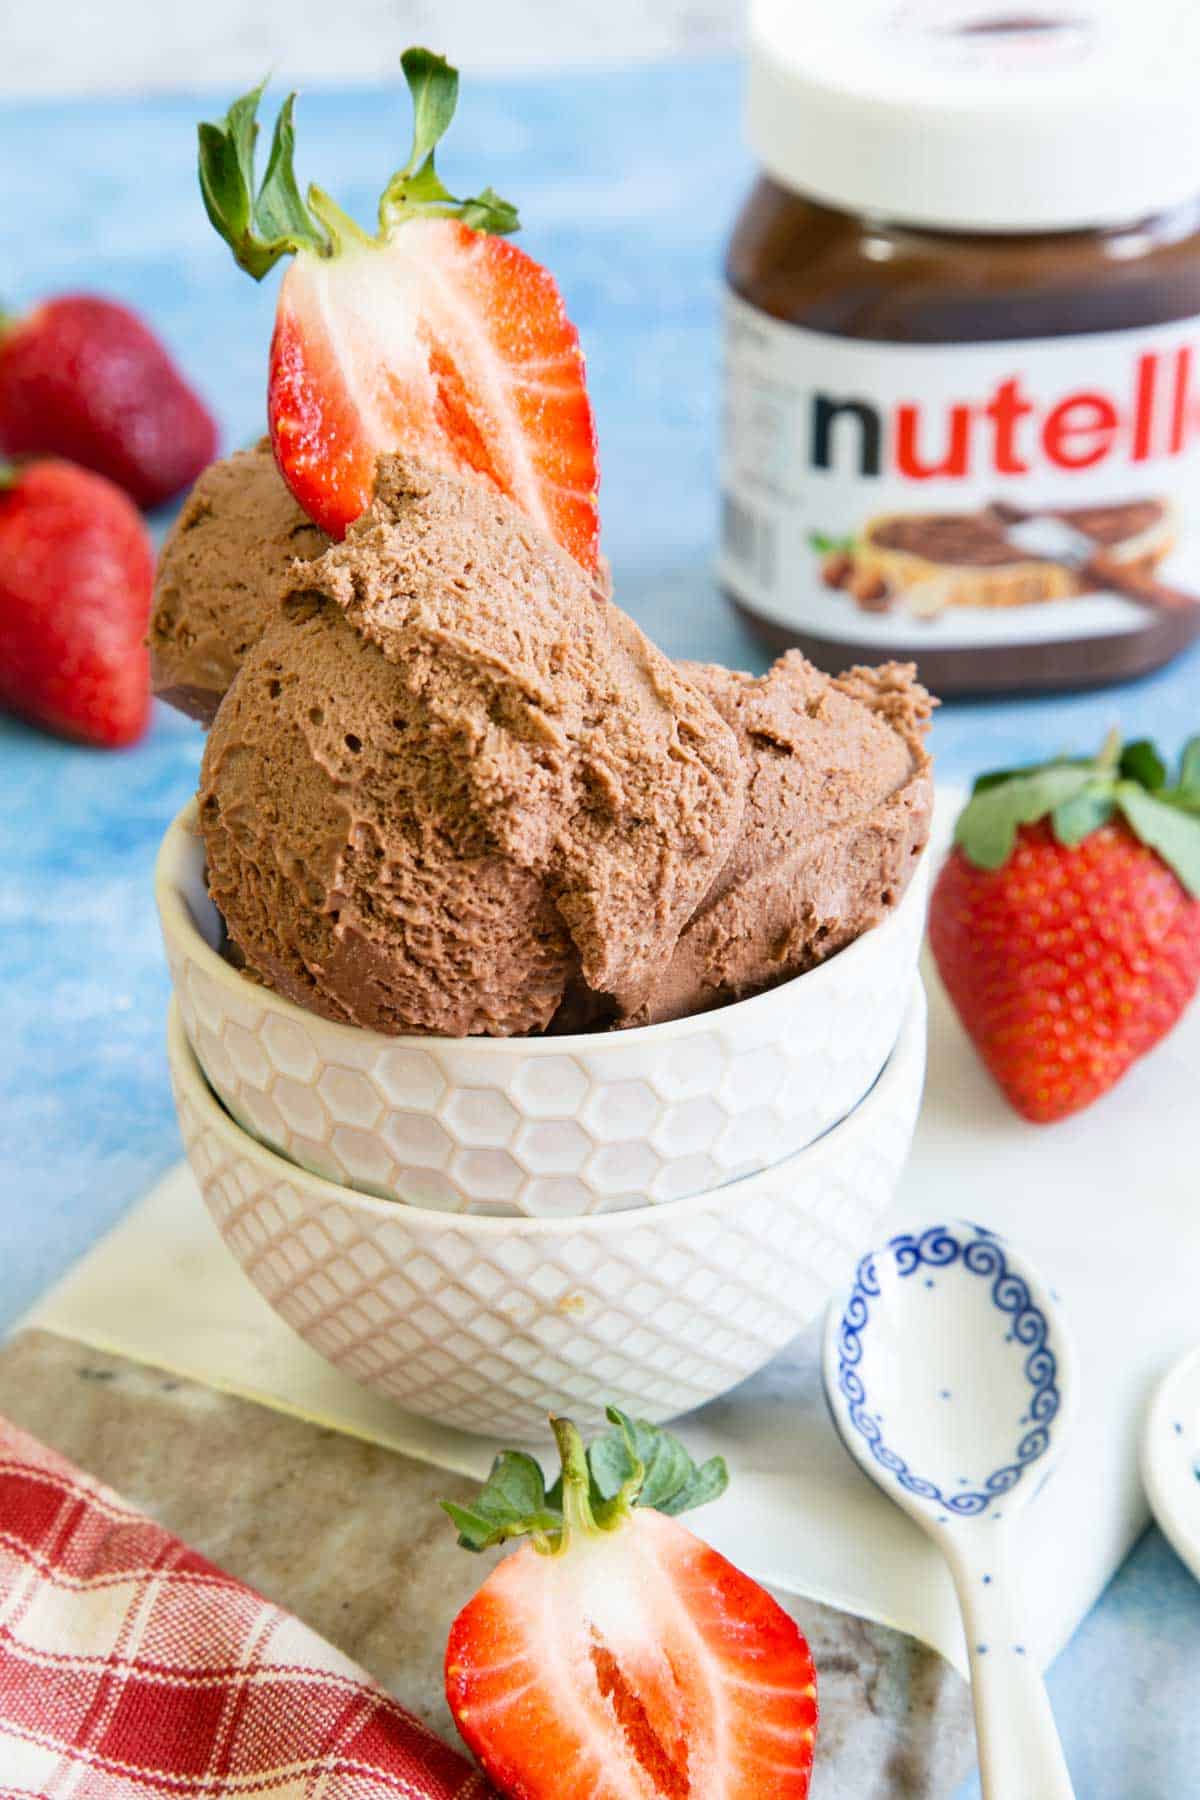 Nutella ice cream served in dainty white dishes, with a jar of Nutella and some strawberries in the background.